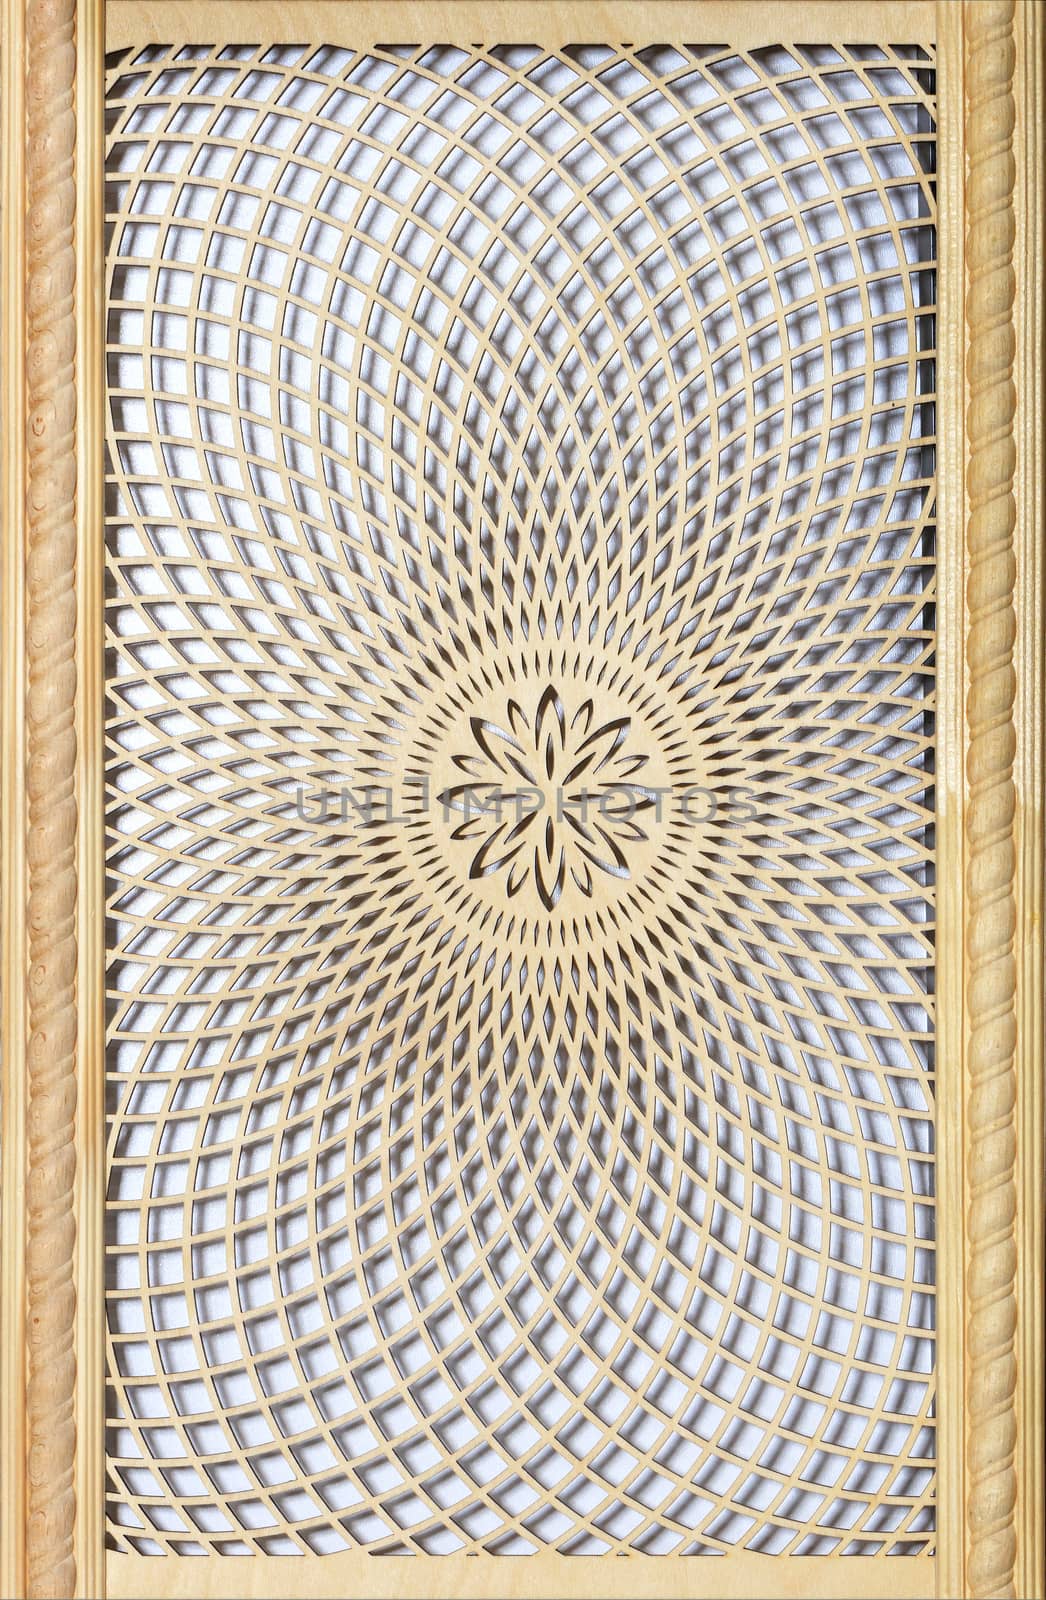 Wooden curly panel with patternwith oriental delicate patternfor wall decoration. by Sergii